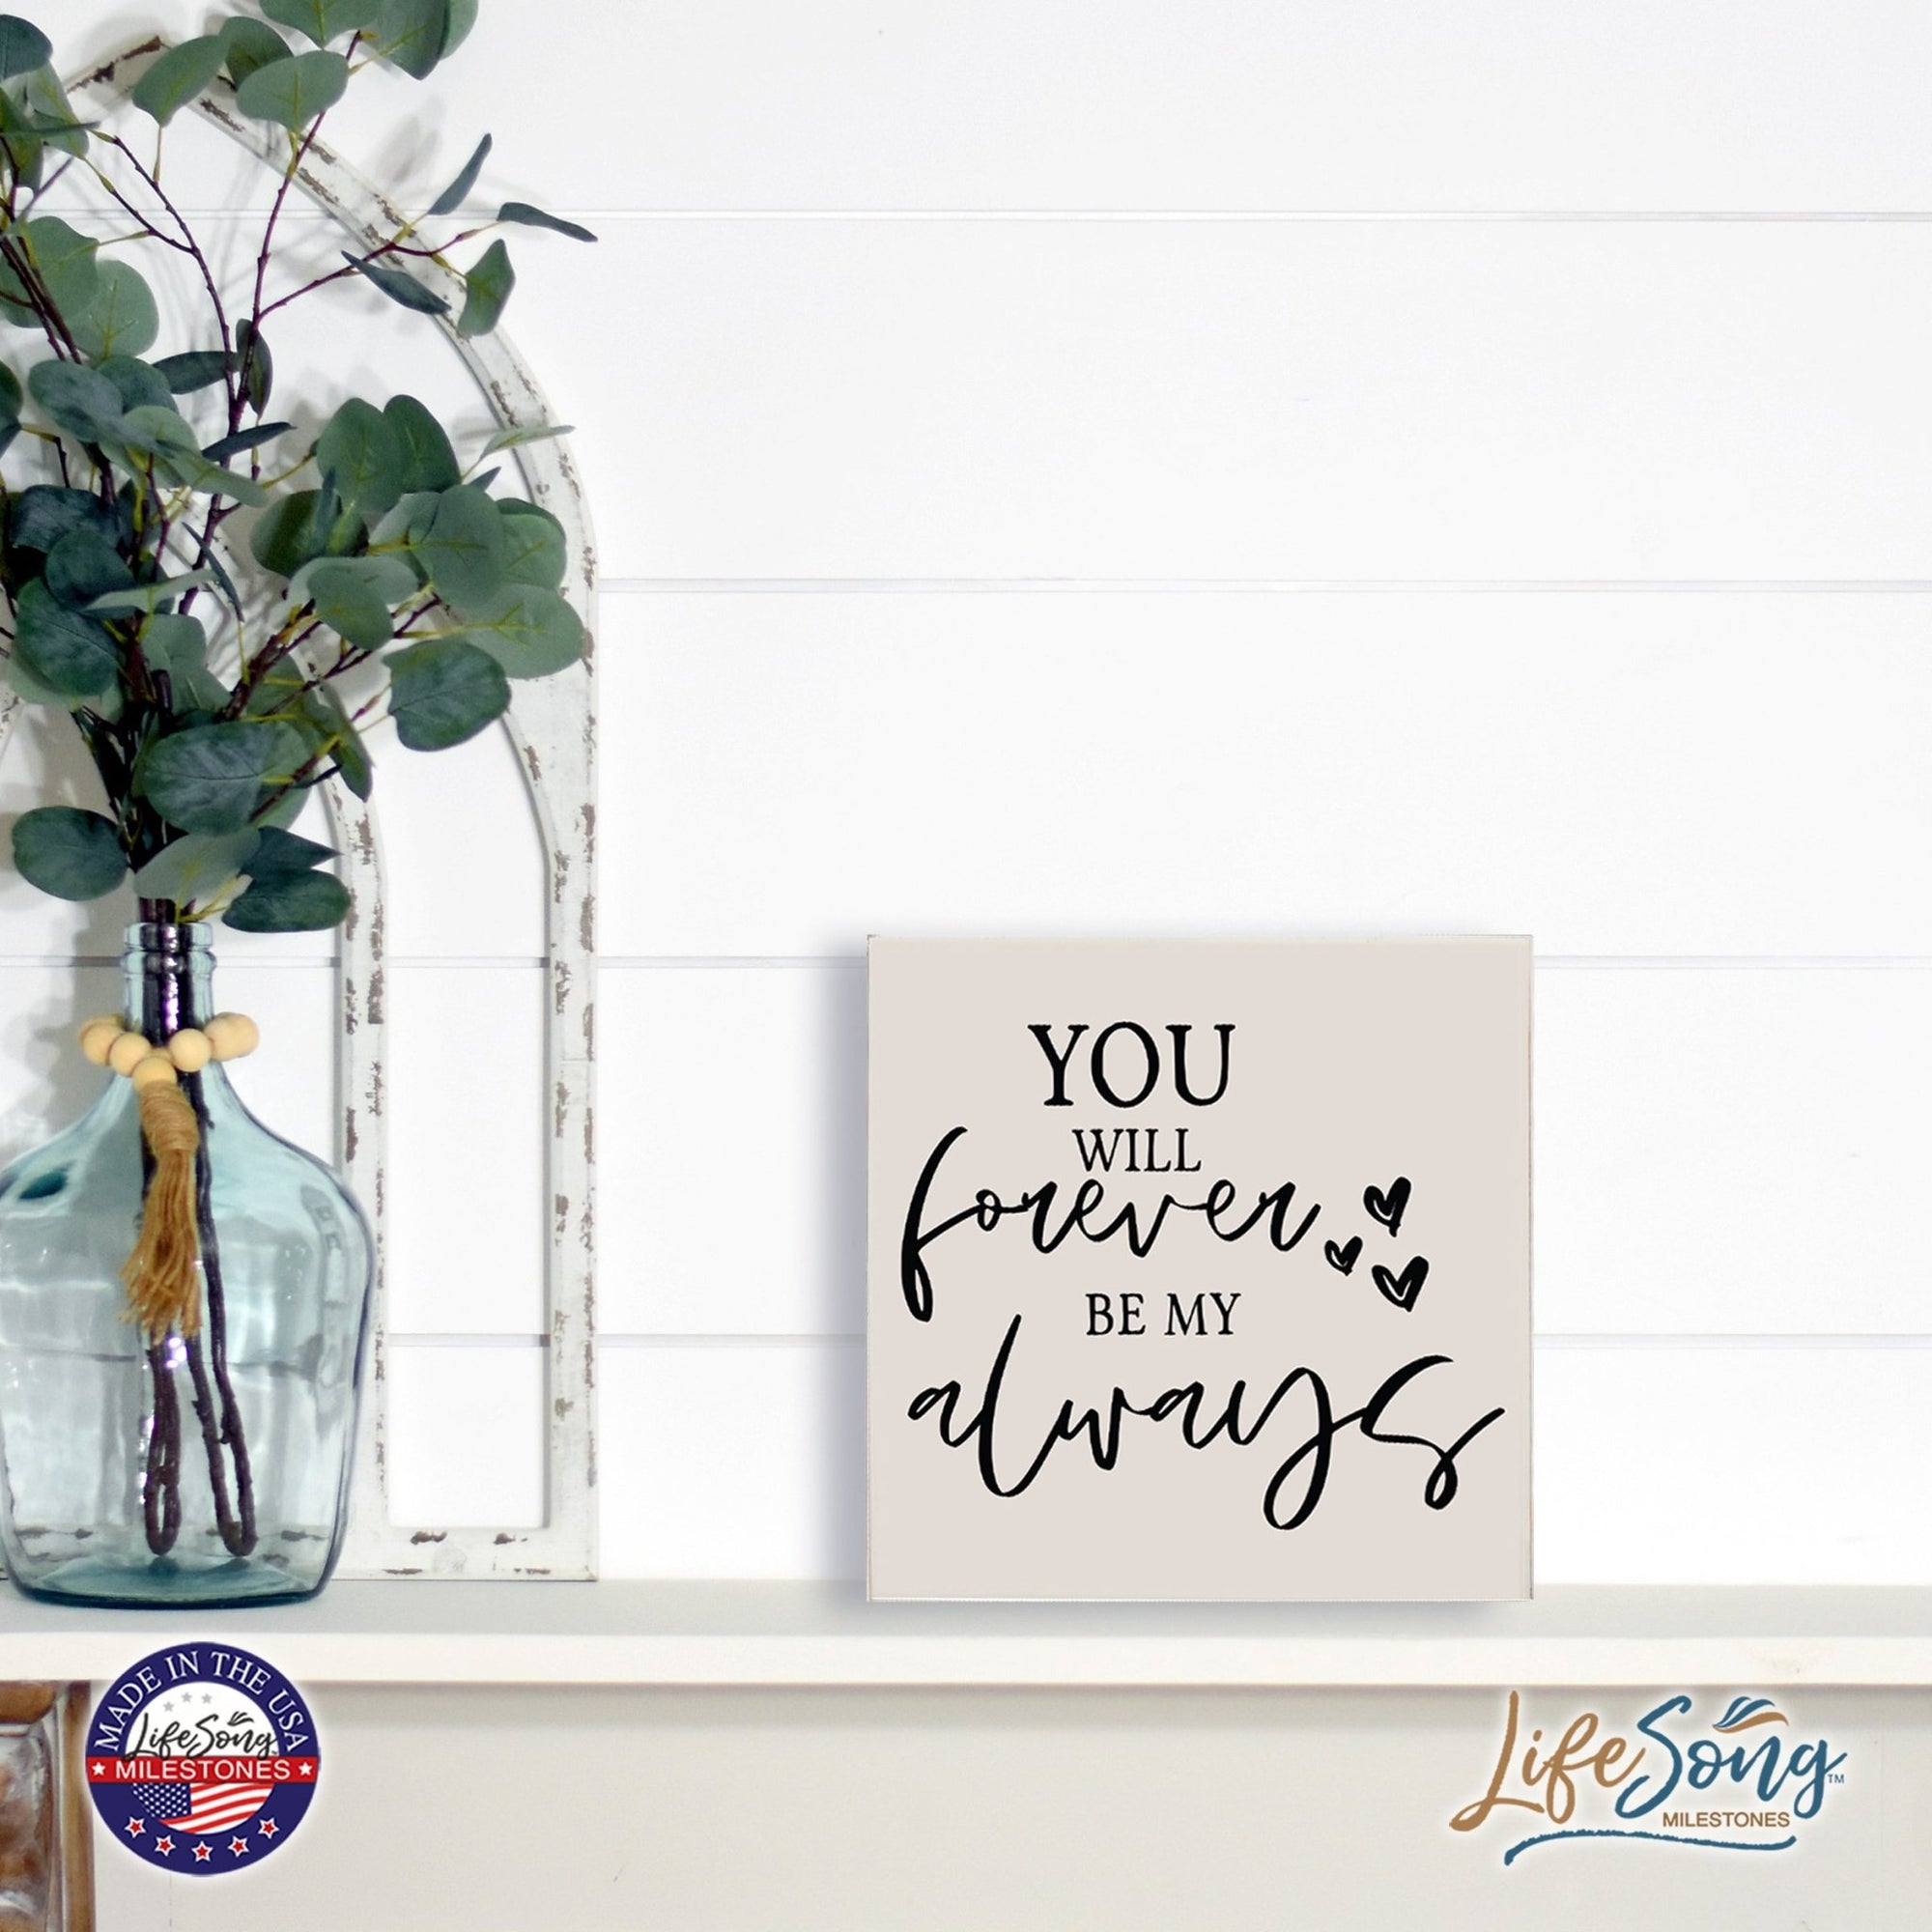 Modern Inspirational Shadow Box for Everyday Home Decorations 6x6 - You Will Forever - LifeSong Milestones